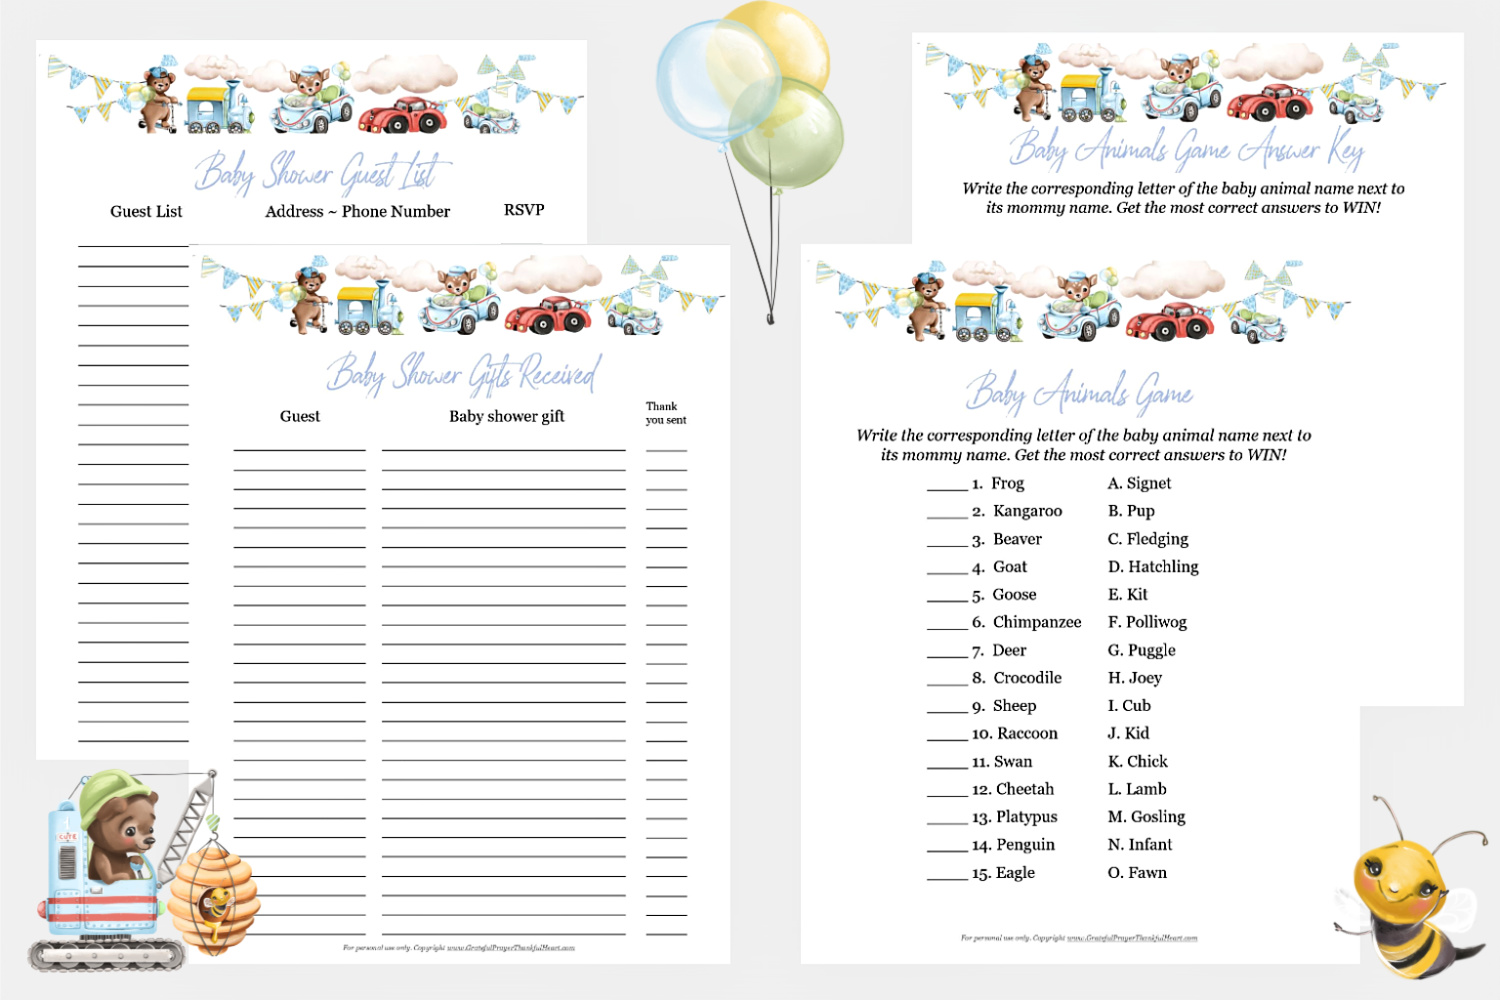 Virtual Baby Shower Games, Gifts and Decorations